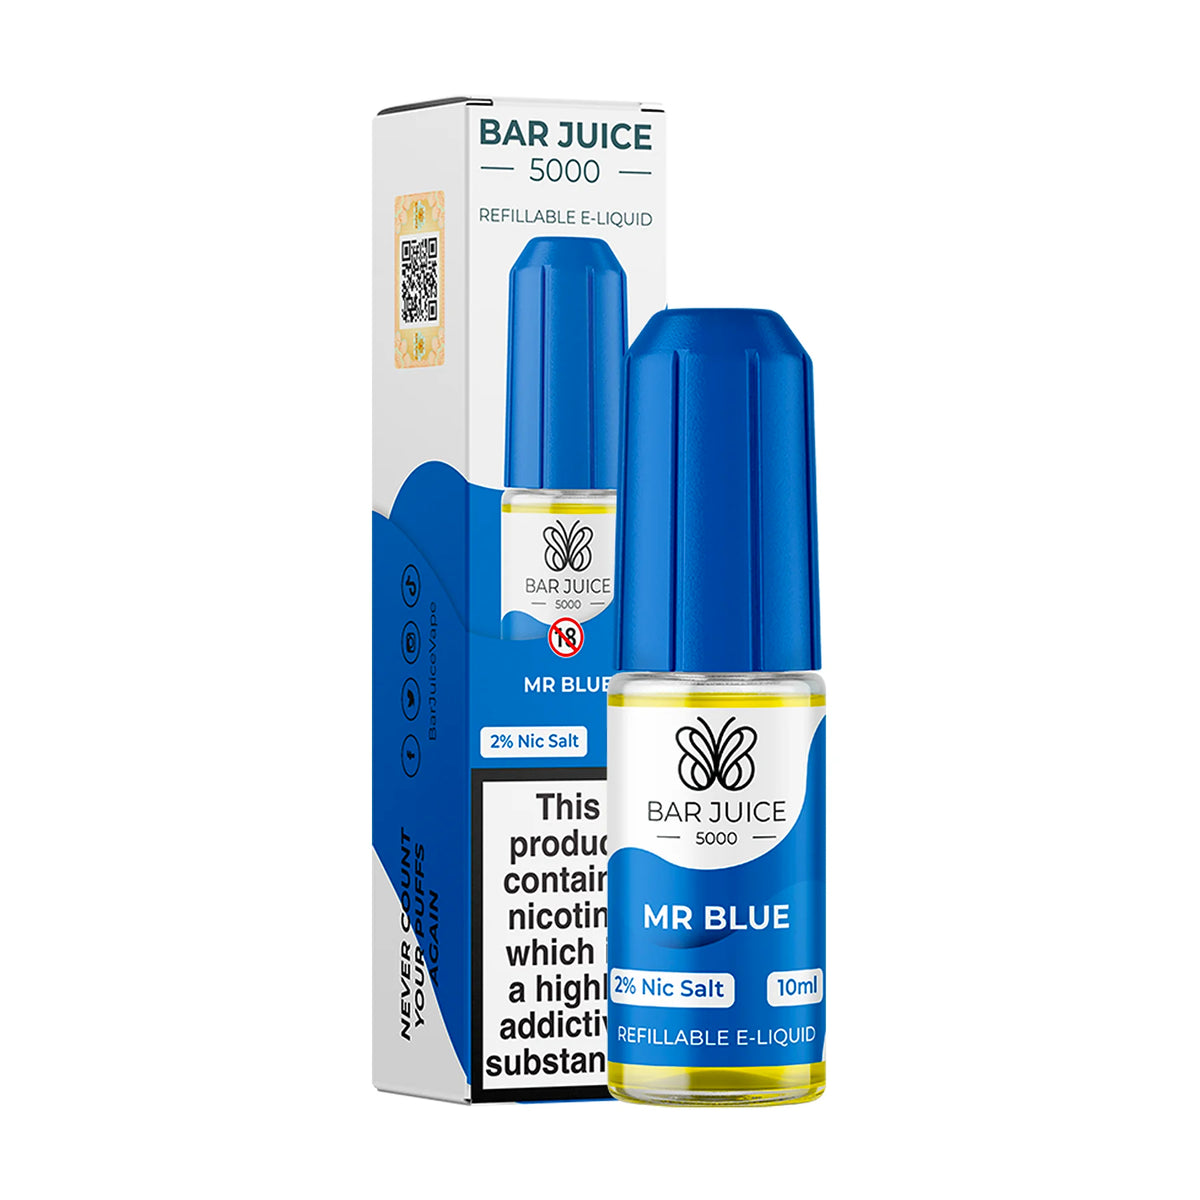 Mr Blue Nic Salt E-Liquid by Bar Juice 5000 is a classic Blue Raspberry Slush, with tasty notes of syrupy sweet raspberry and blueberry with a cool exhale.